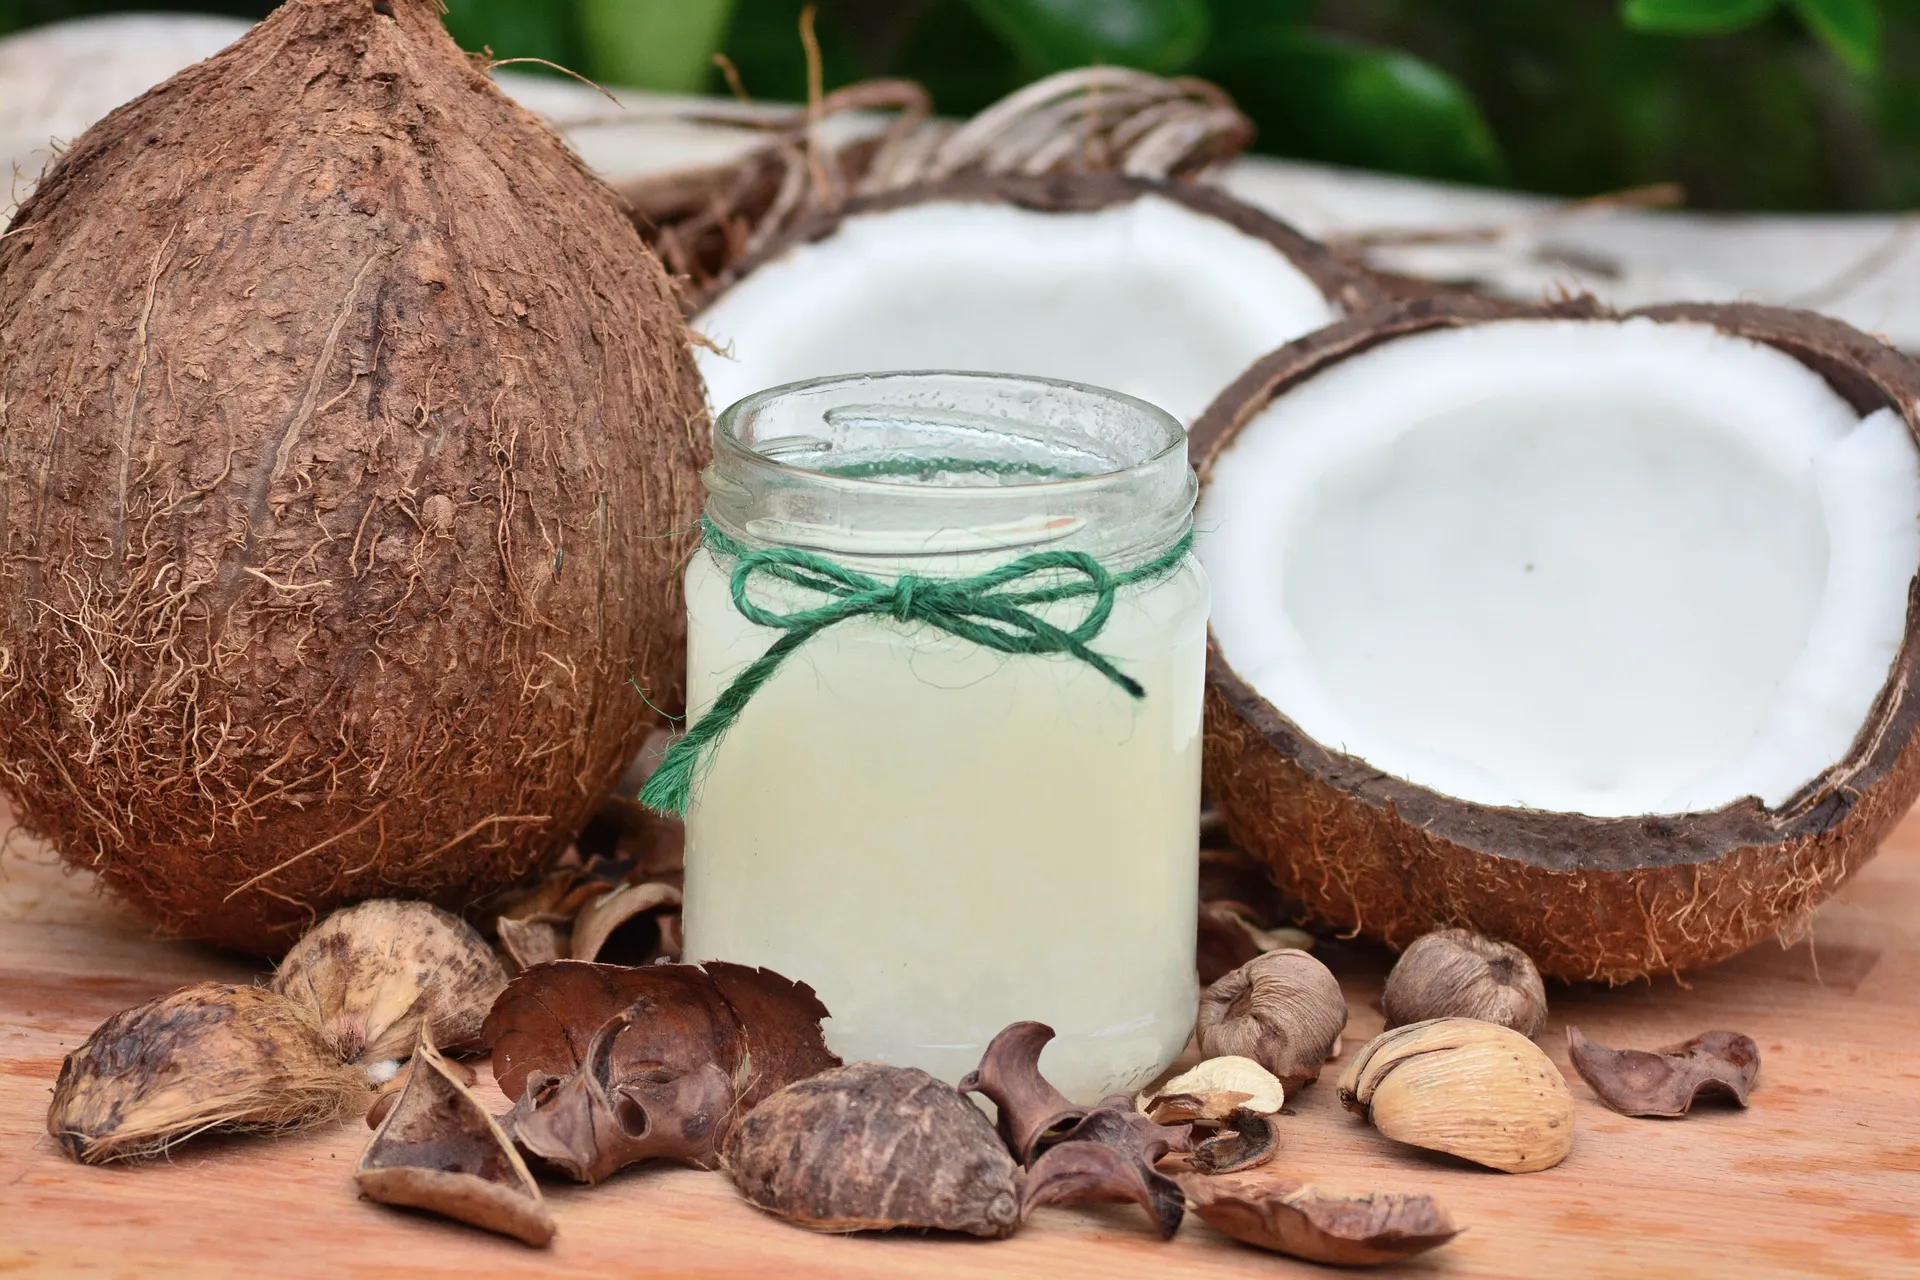 Coconut oil is saturated plant oil with many health properties.